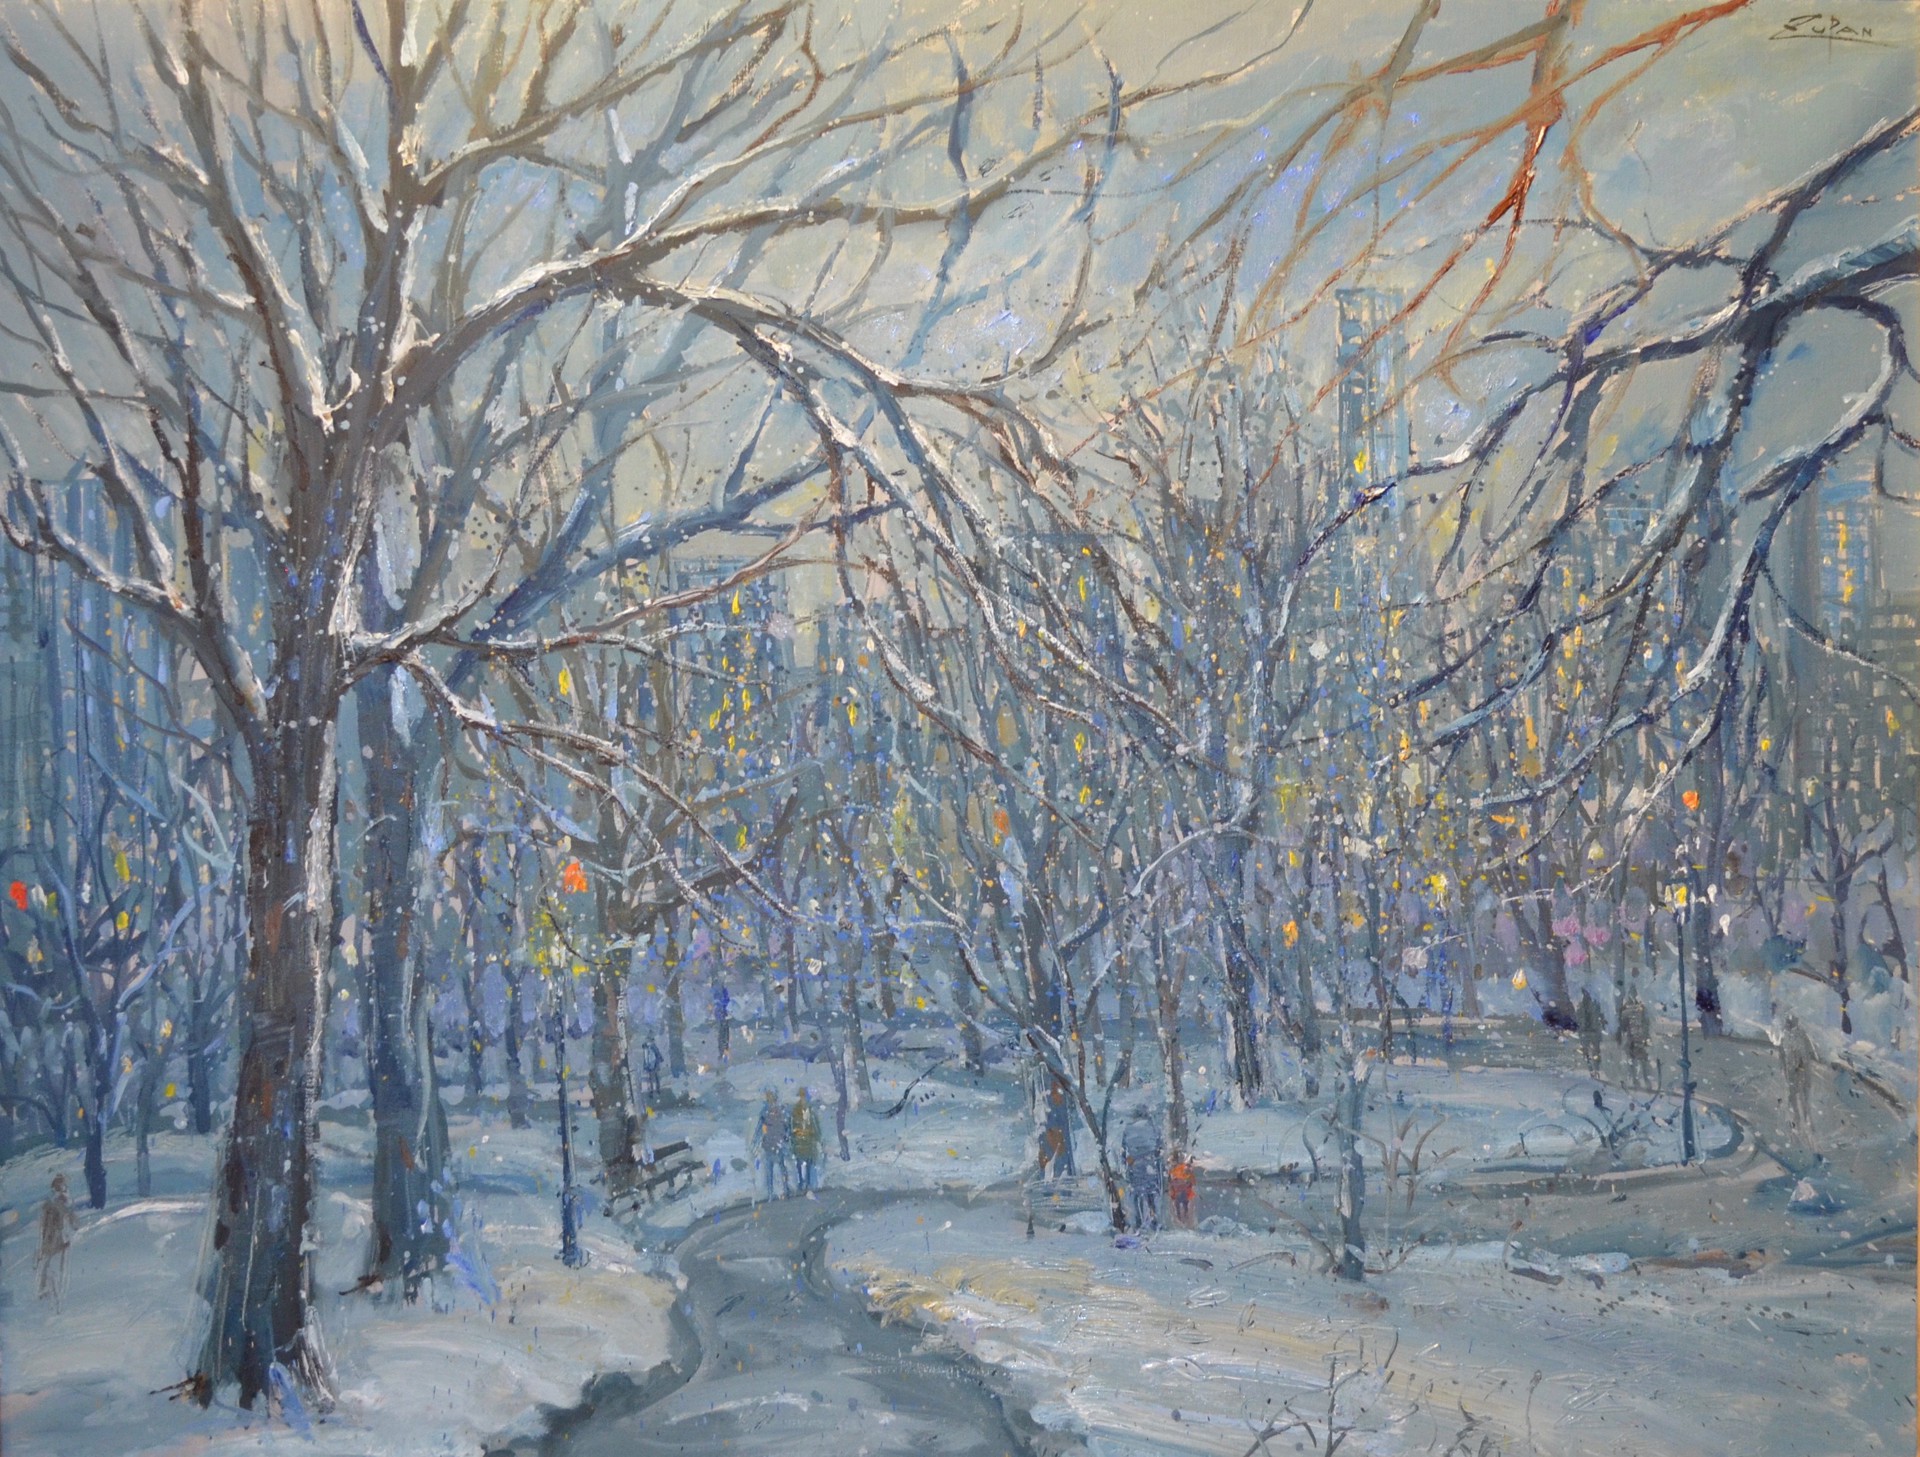 Path Through Central Park In The Snow By Bruno Zupan Artcloud